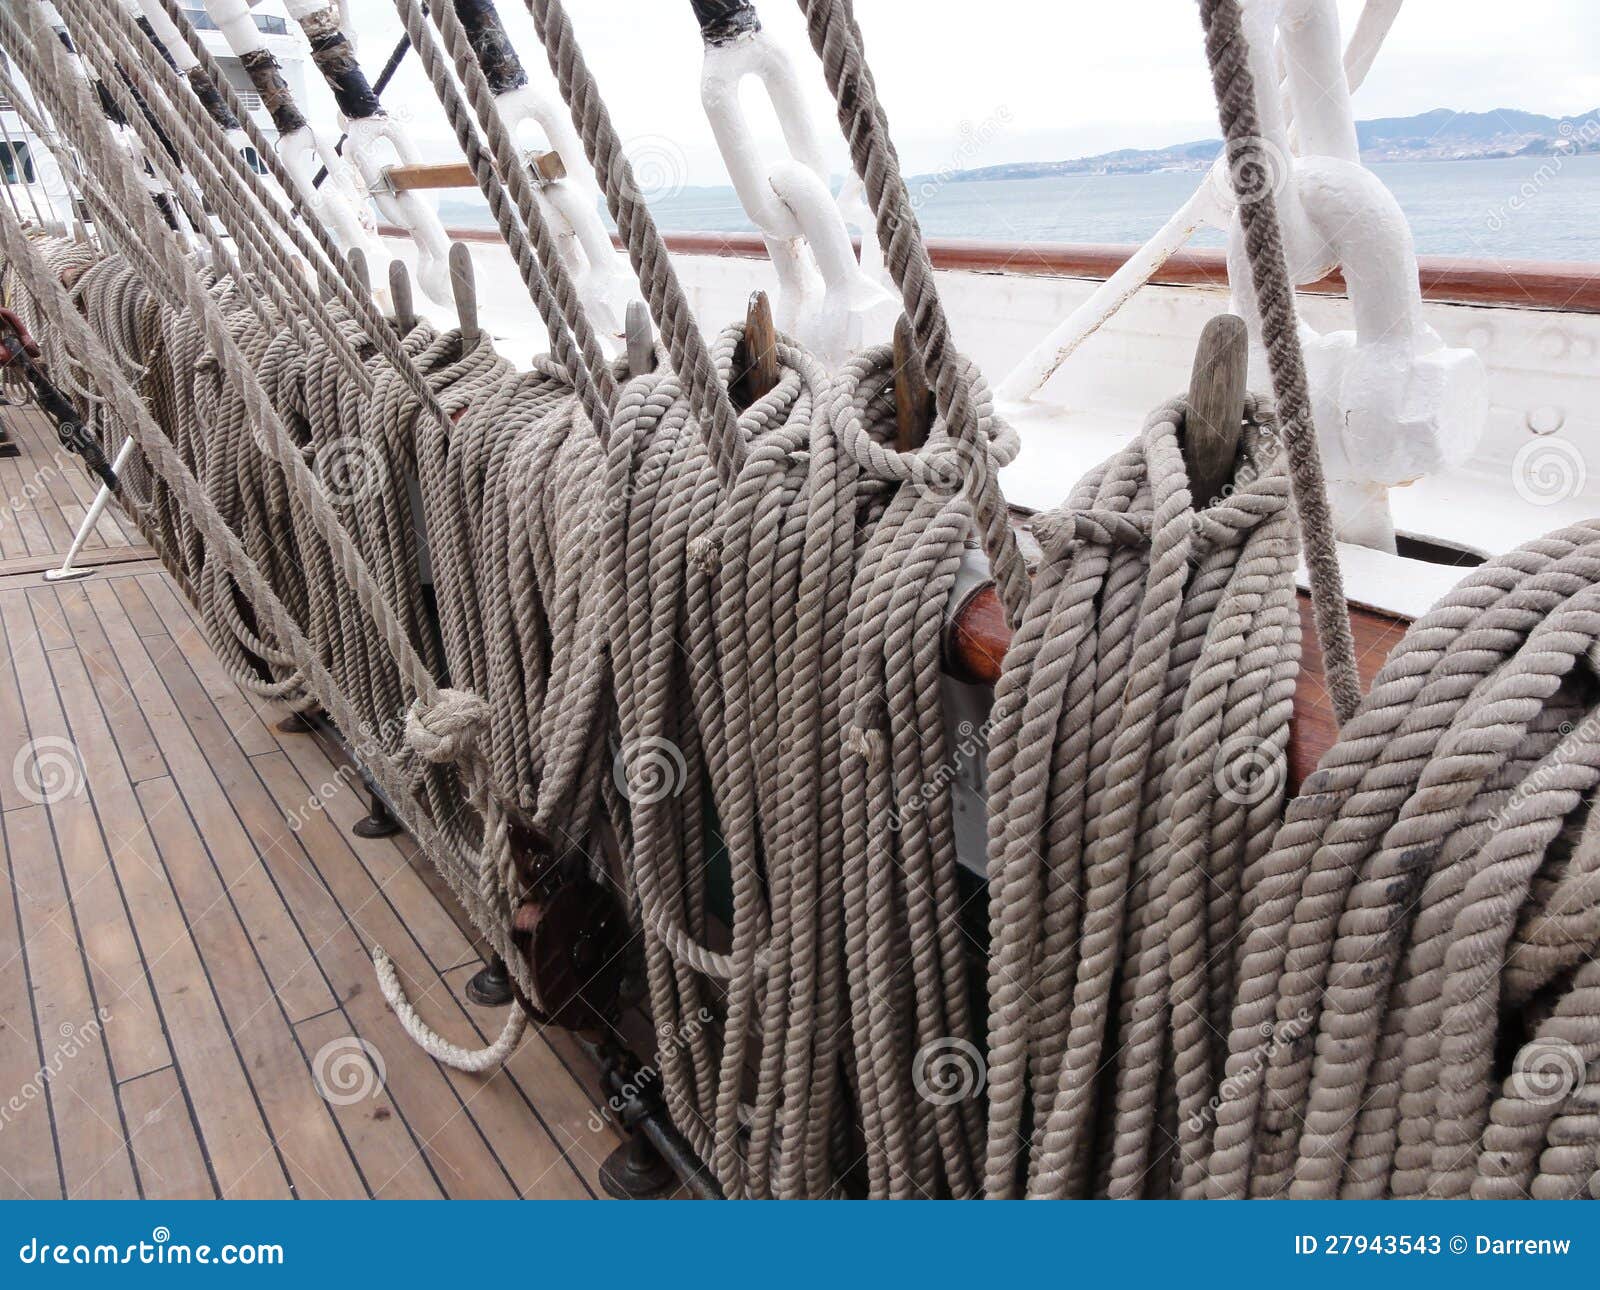 Ship rope stock image. Image of rigging, rope, deck, equipment